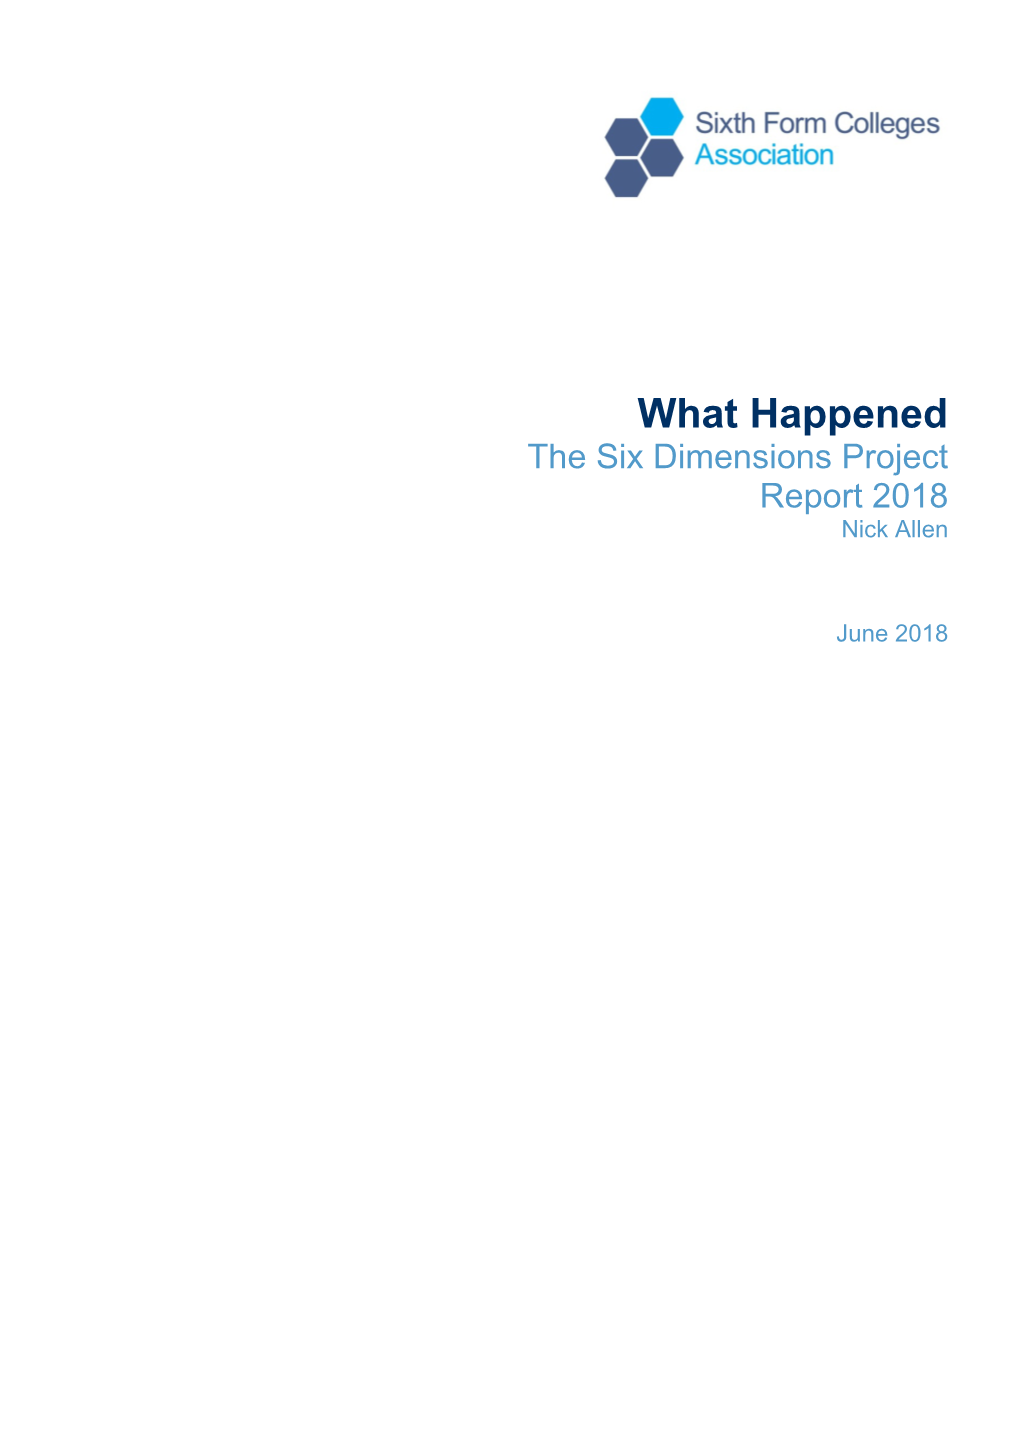 What Happened the Six Dimensions Project Report 2018 Nick Allen